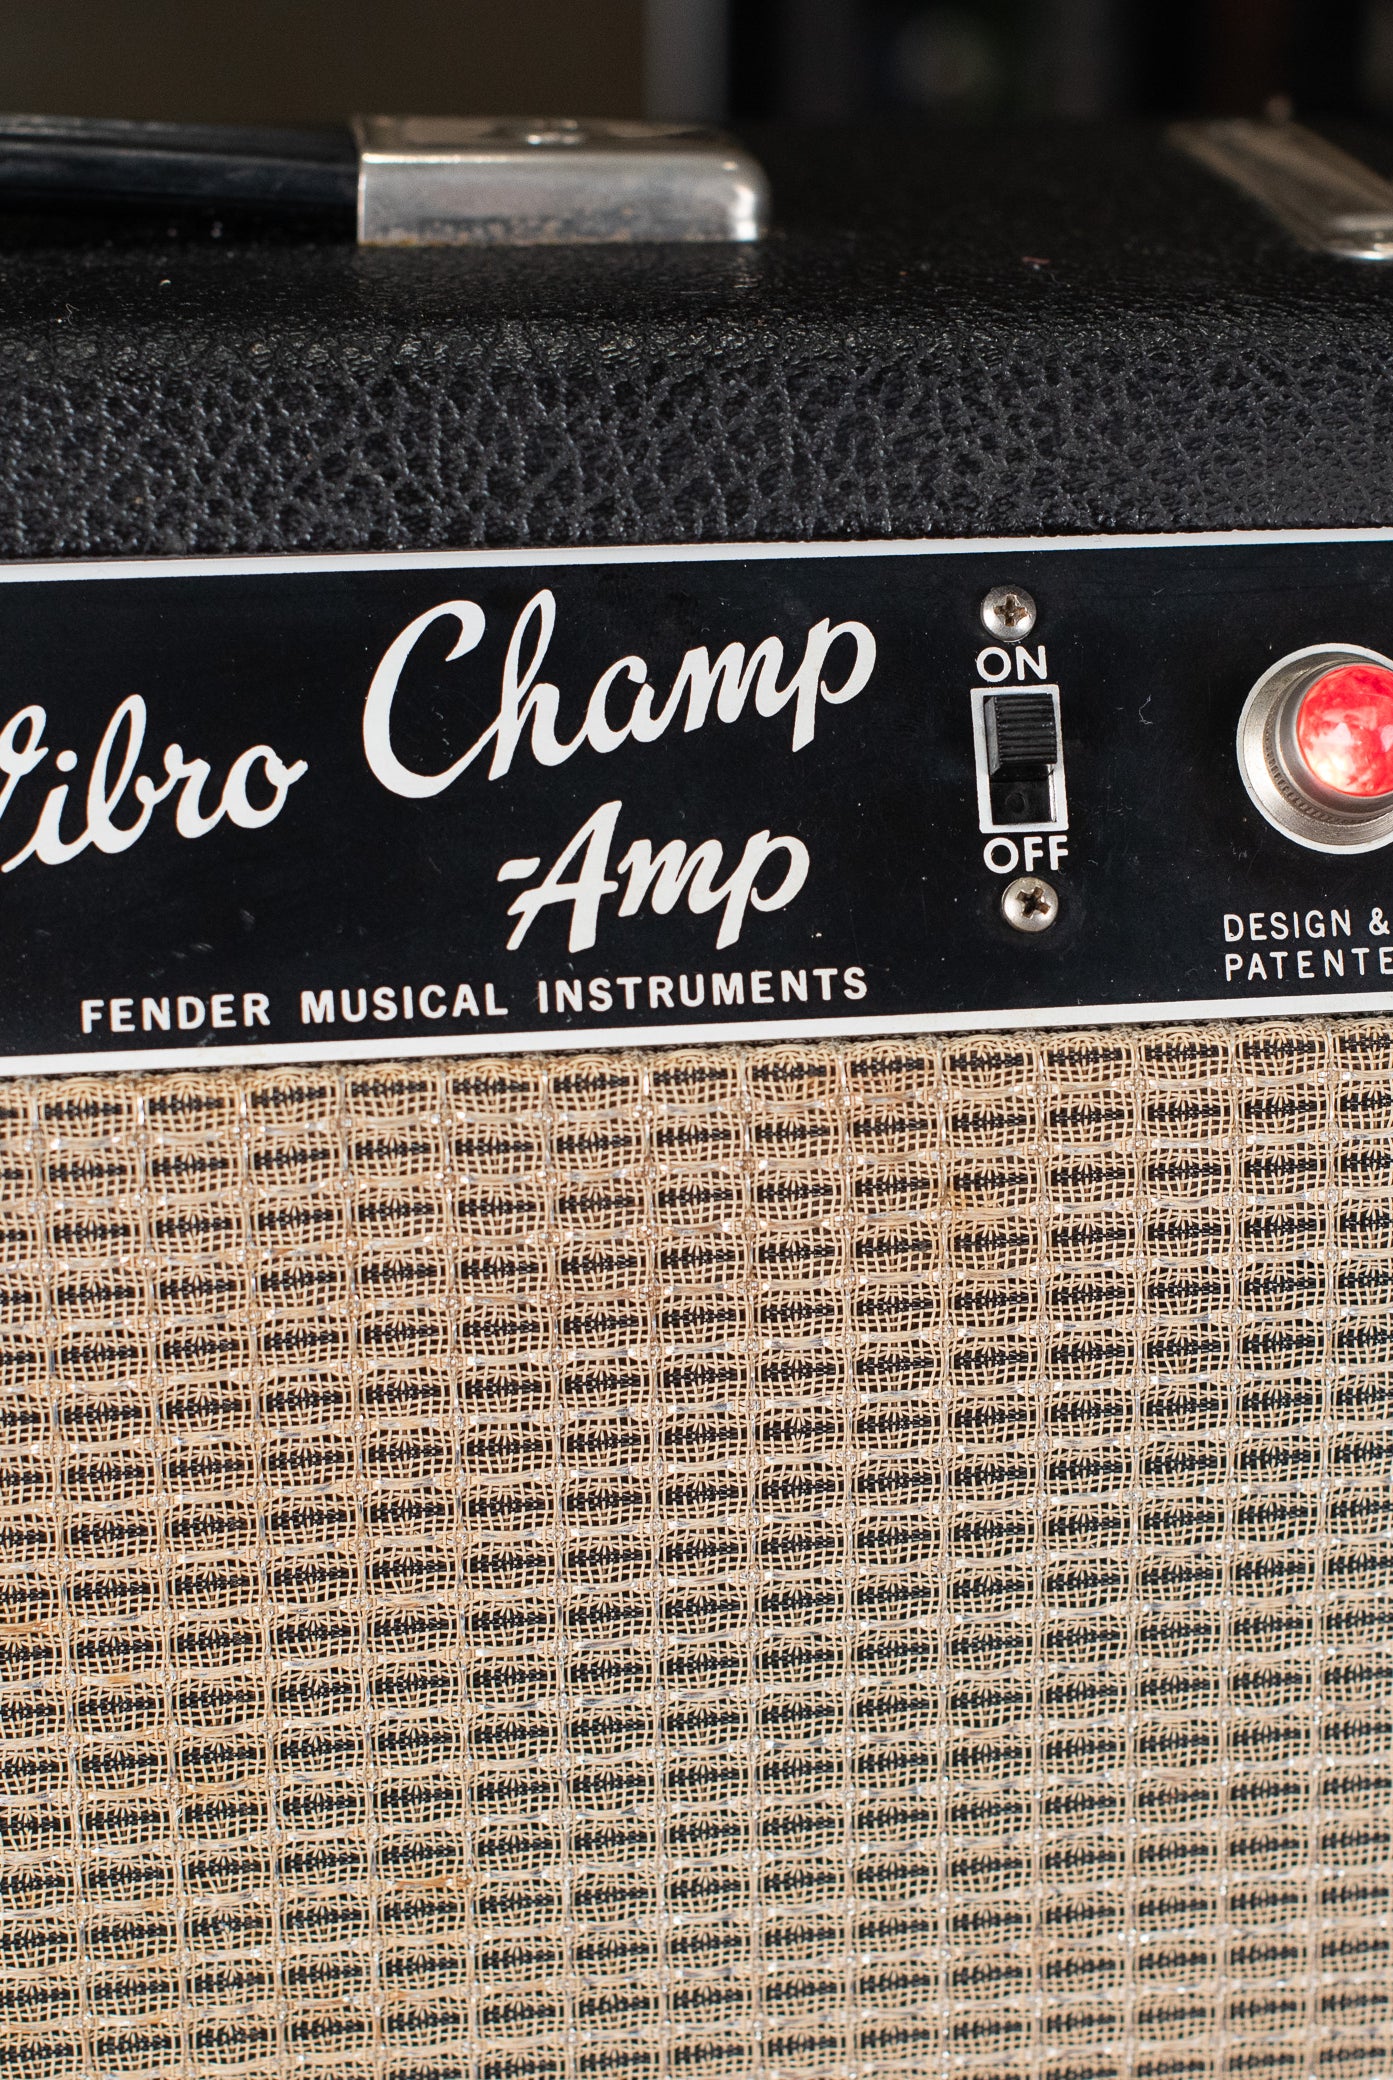 How old is my Fender amp, how to date Fender amps